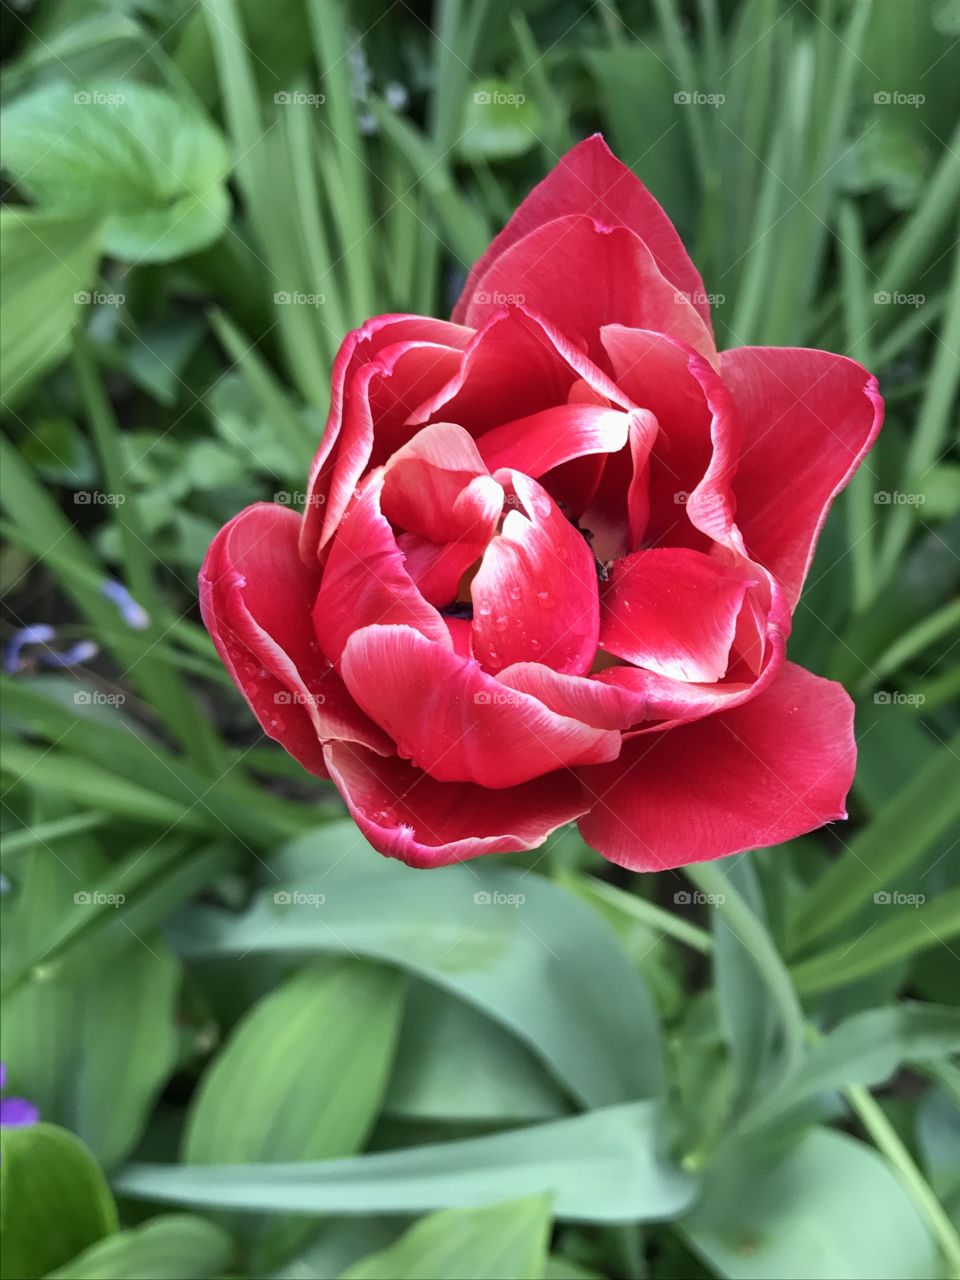 Red doubled tulip flower.